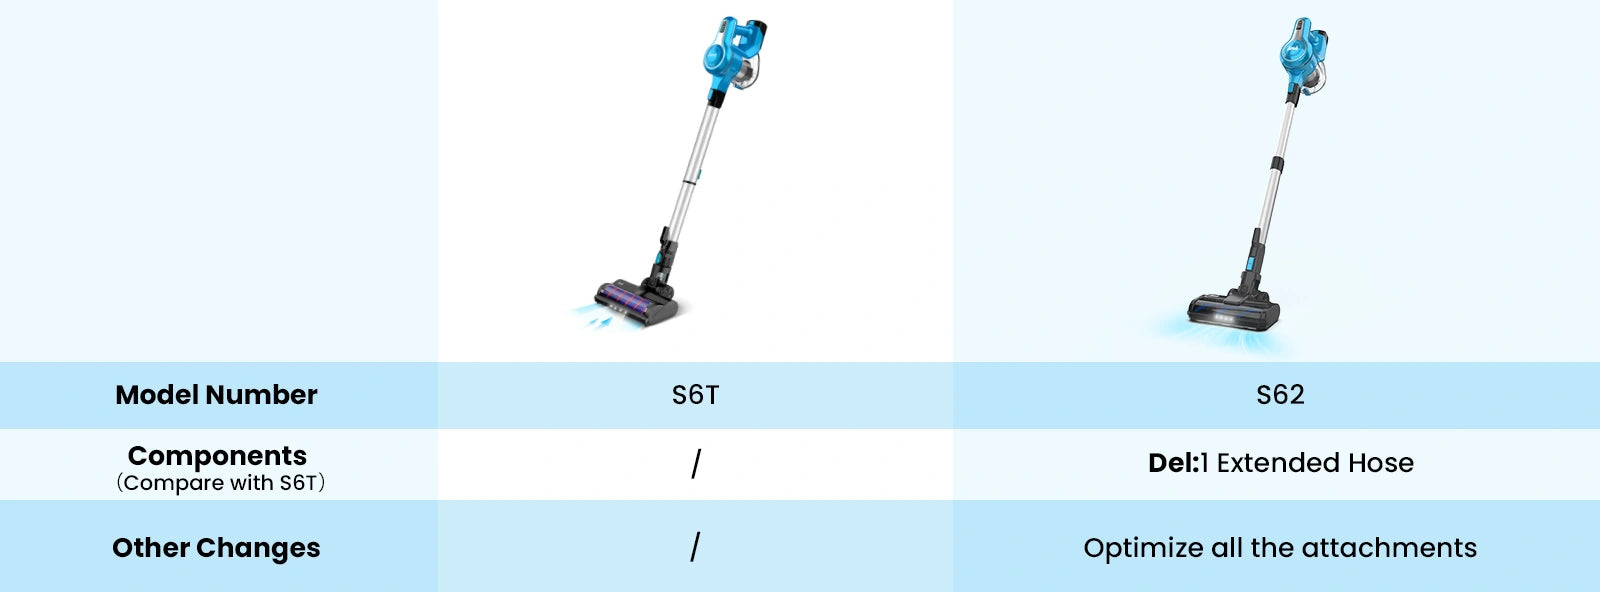 inse_s62_cordless_vacuum_compare_with_inse_s6t_cordless_vacuum_for_desktop